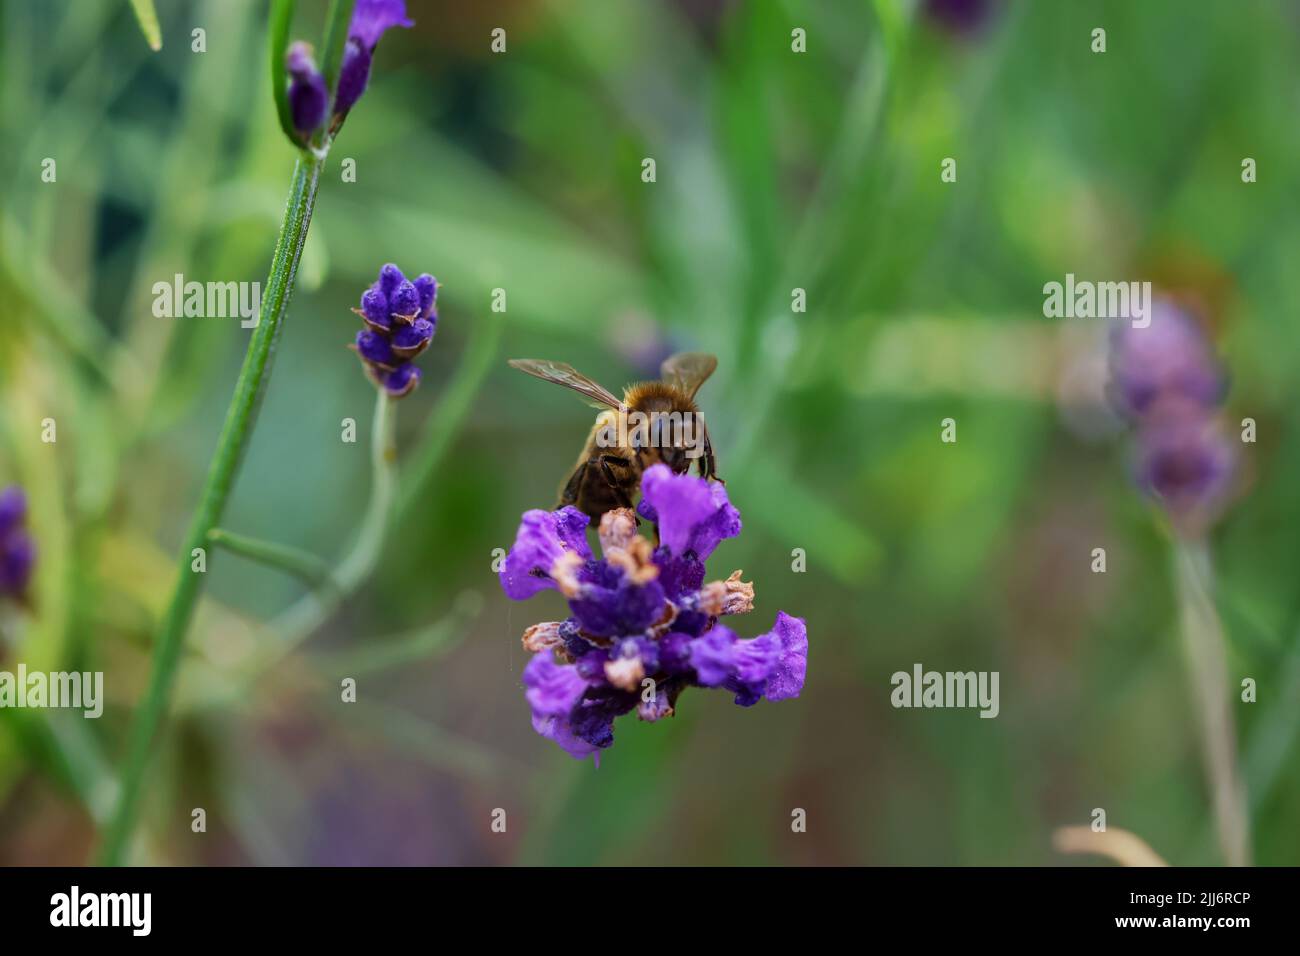 Wasp pollinates purple lavender flowers. Macro closeup insect collecting pollen during summer. Blurred background. Dublin, Ireland Stock Photo